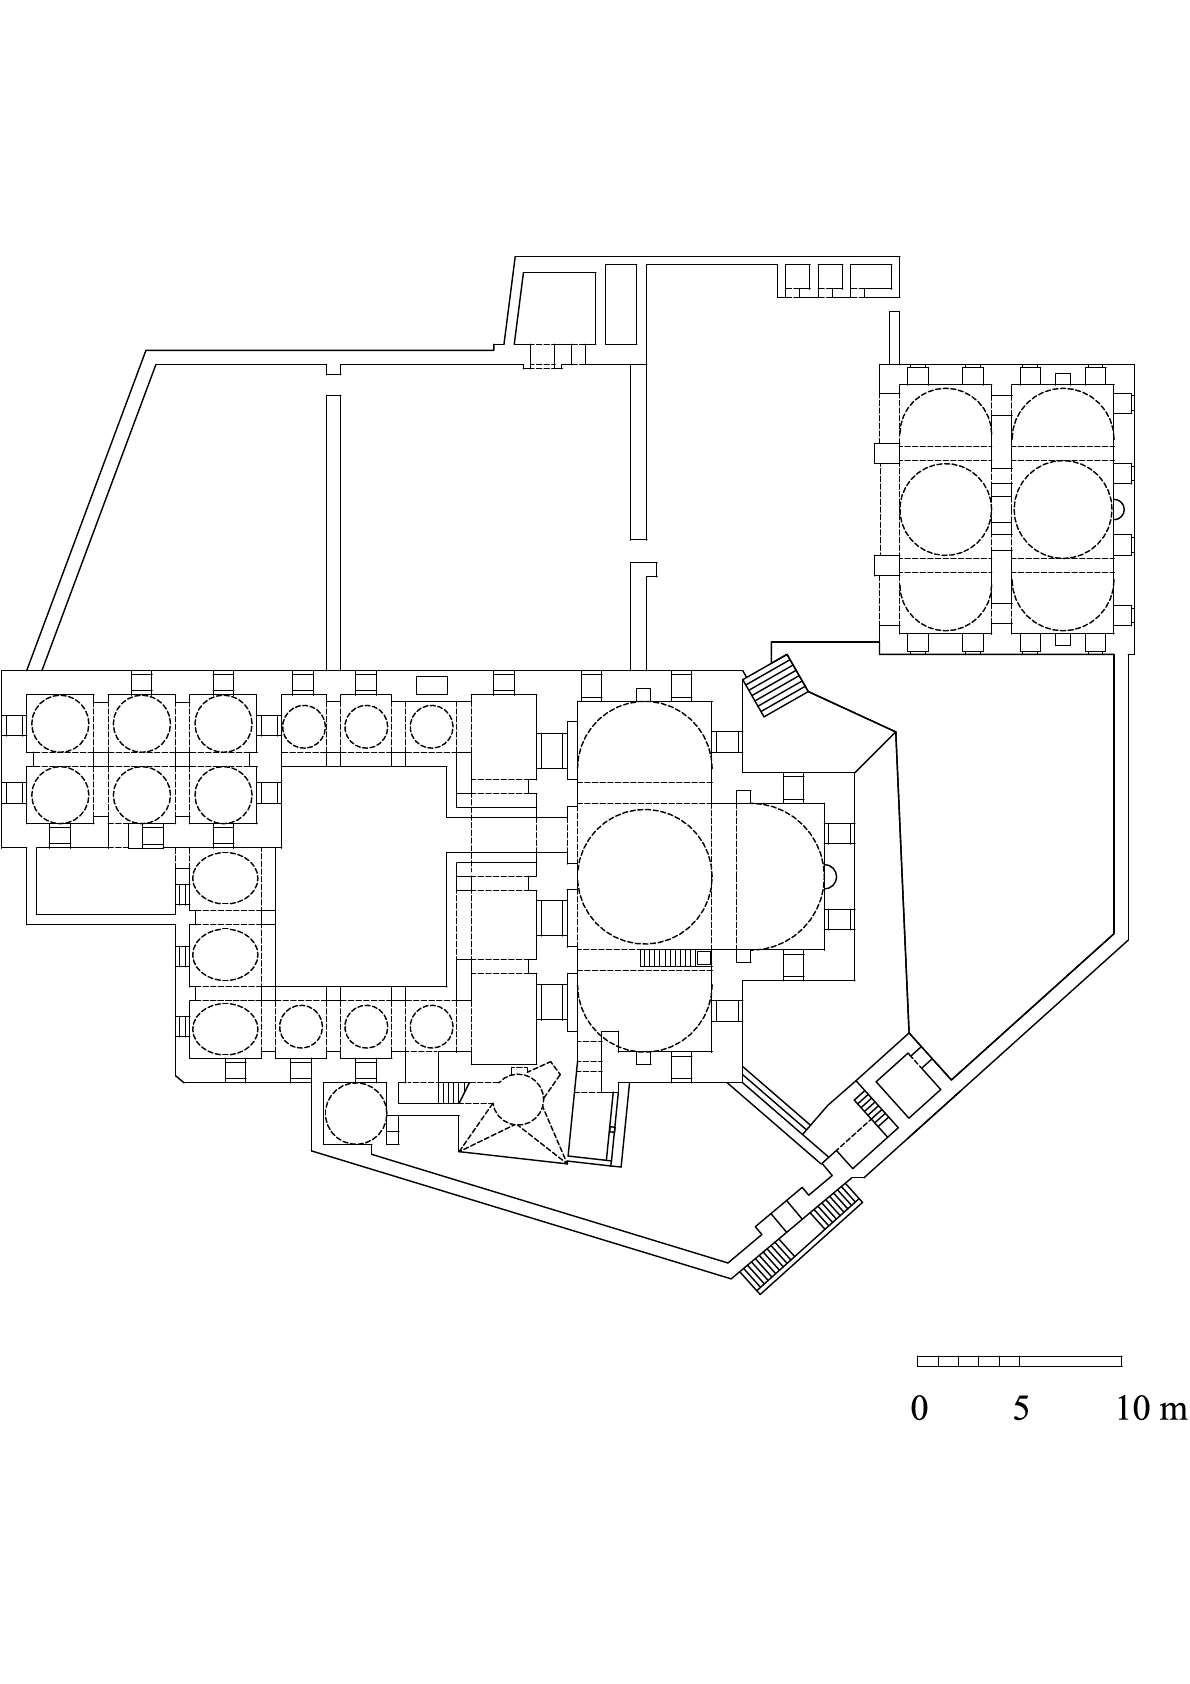 Masjid Suleyman Pasha - Floor plan of the complex in the Cairo Citadel, with the funerary shrine of Sidi Sariya at the northeast corner of the mosque forecourt and an elementary school in the lower platform. DWG file in AutoCAD 2000 format. Click the download button to download a zipped file containing the .dwg file.